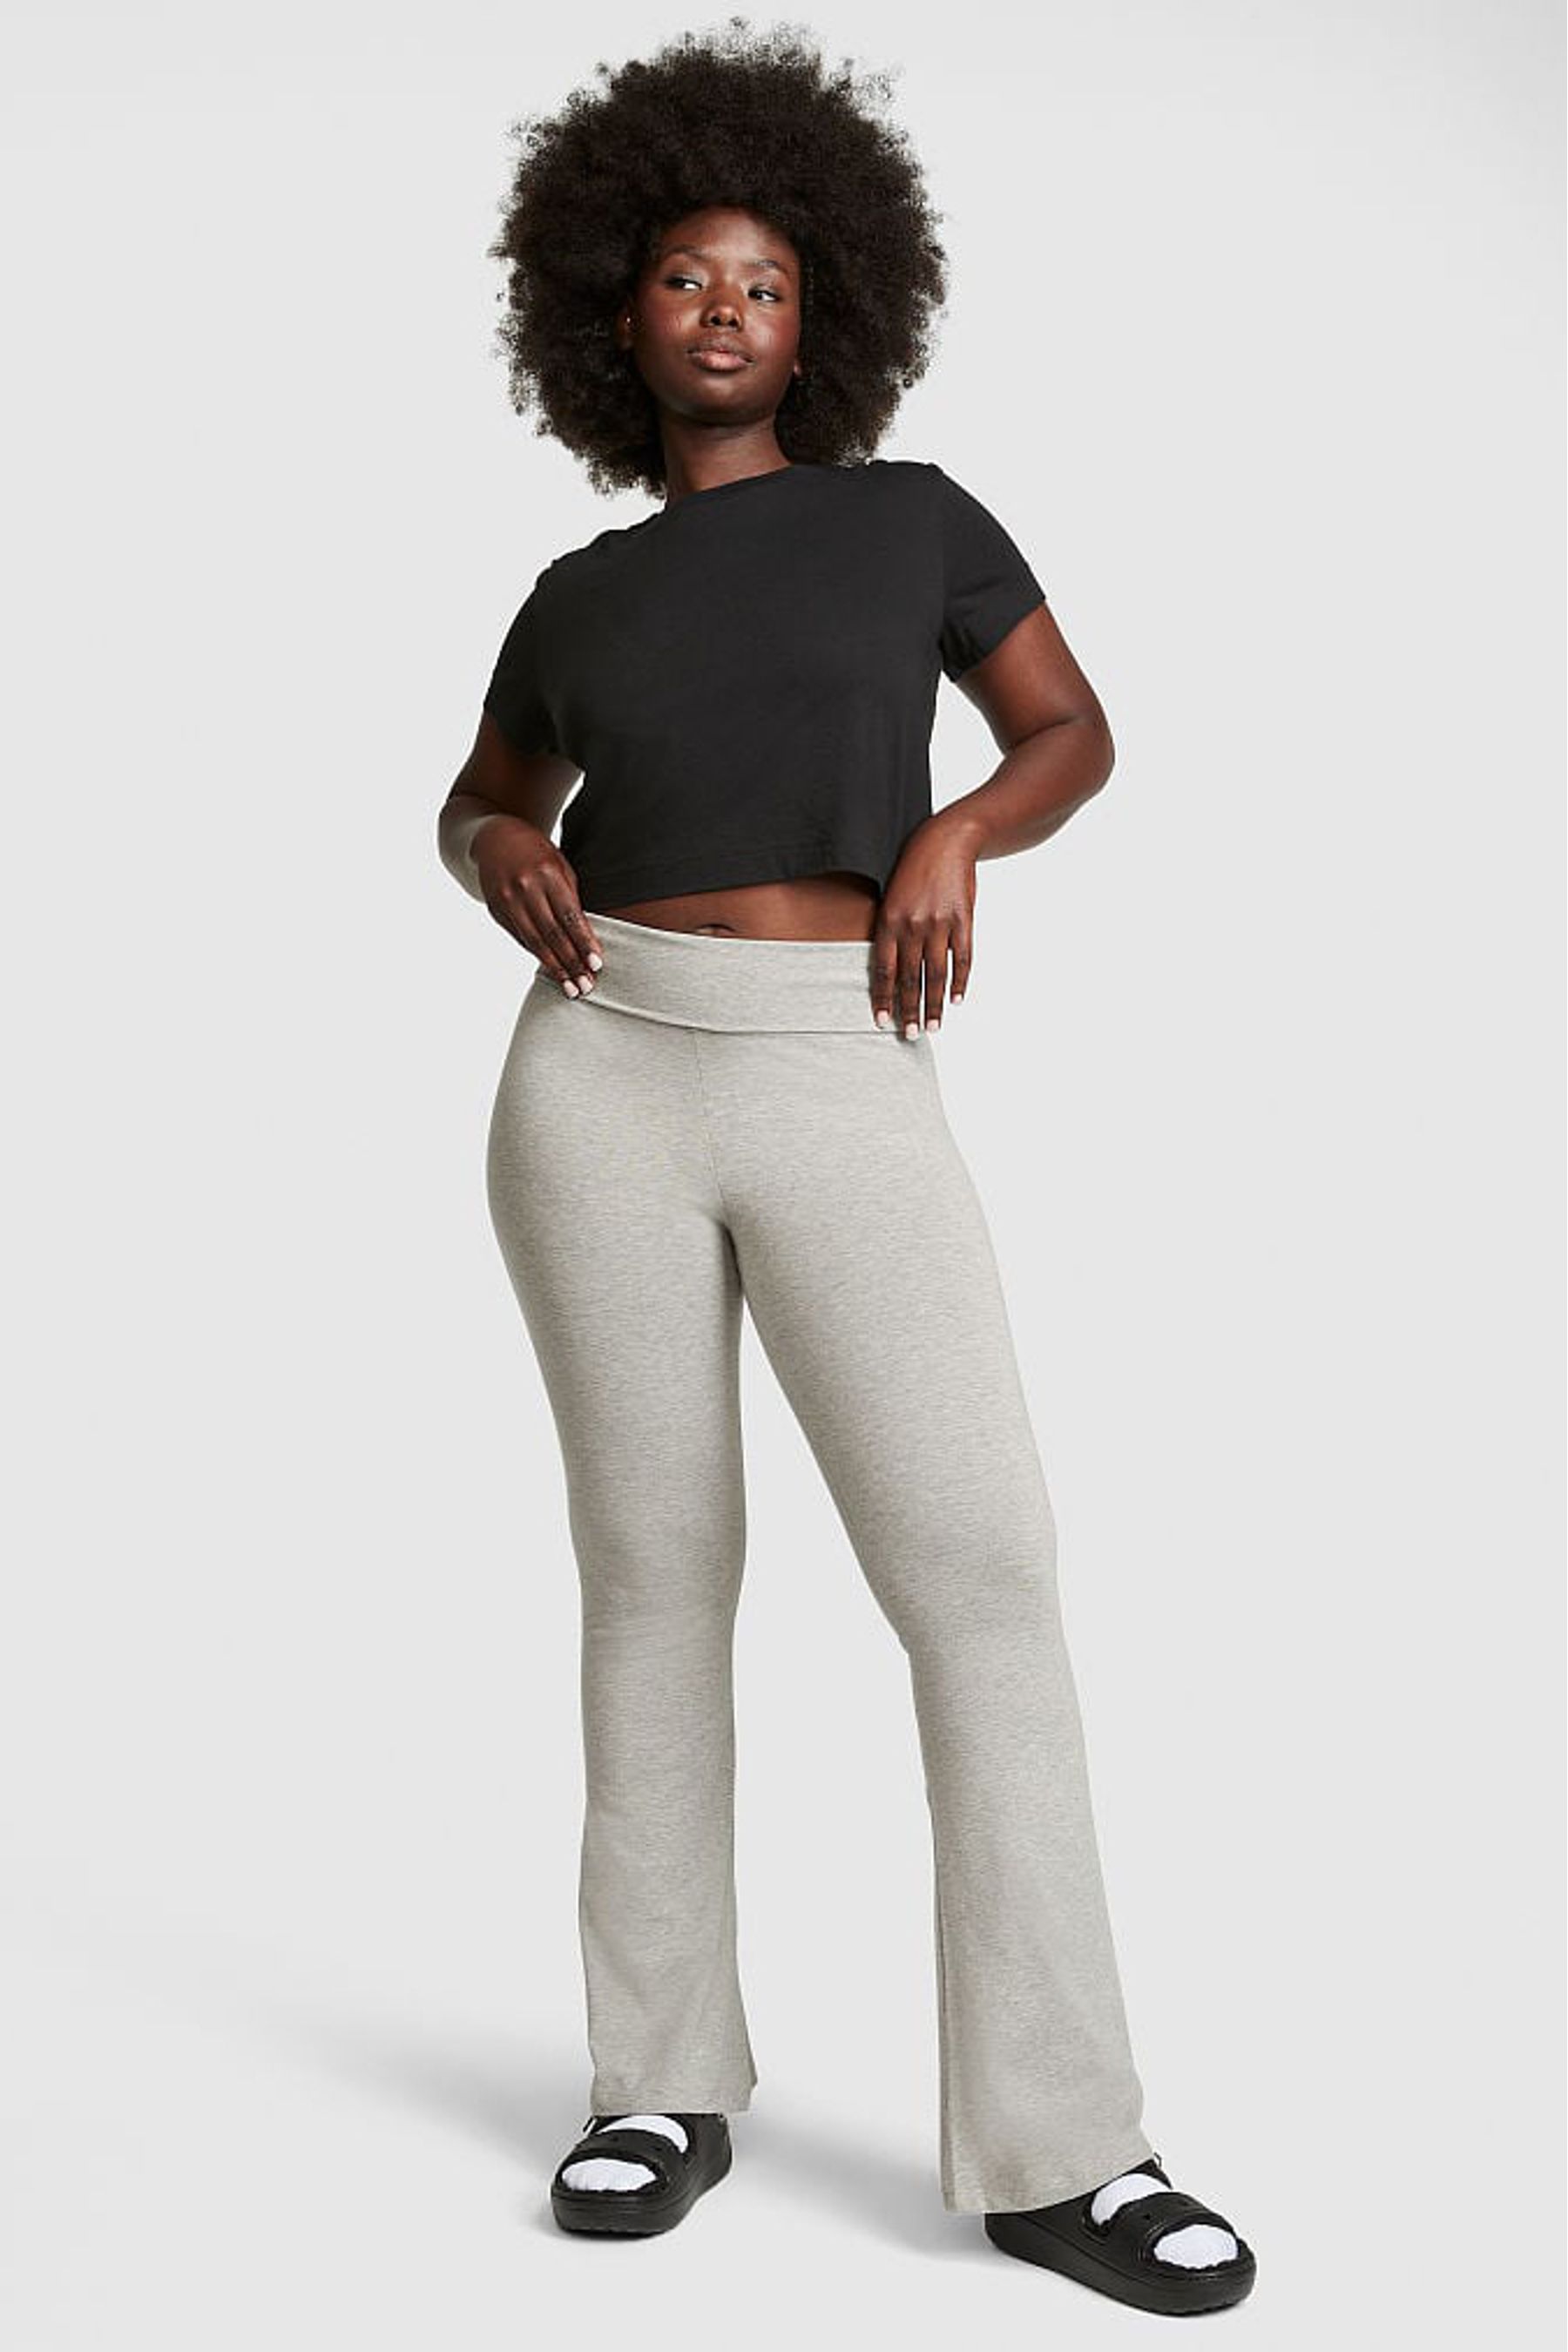 Buy Victoria's Secret PINK Cotton Foldover Flare Legging from the ...